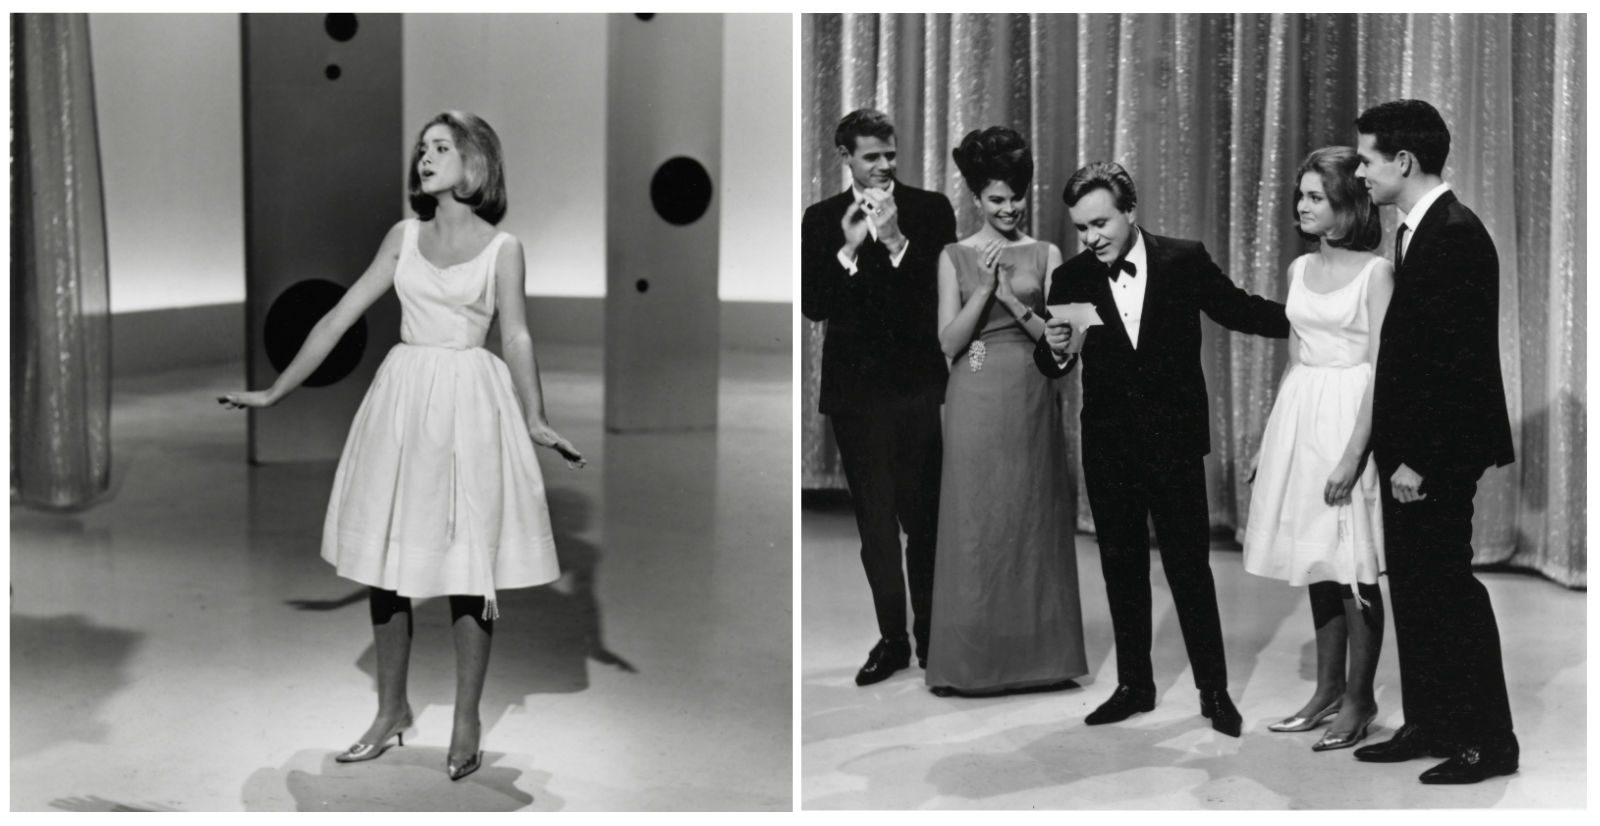 Two images of Olivia Newton-John. On the left is a full length shot of her wearing a white dress and singing. On the right she is standing next to Johnny O'Keefe along with three other people on the set of 'Sing Sing Sing'.